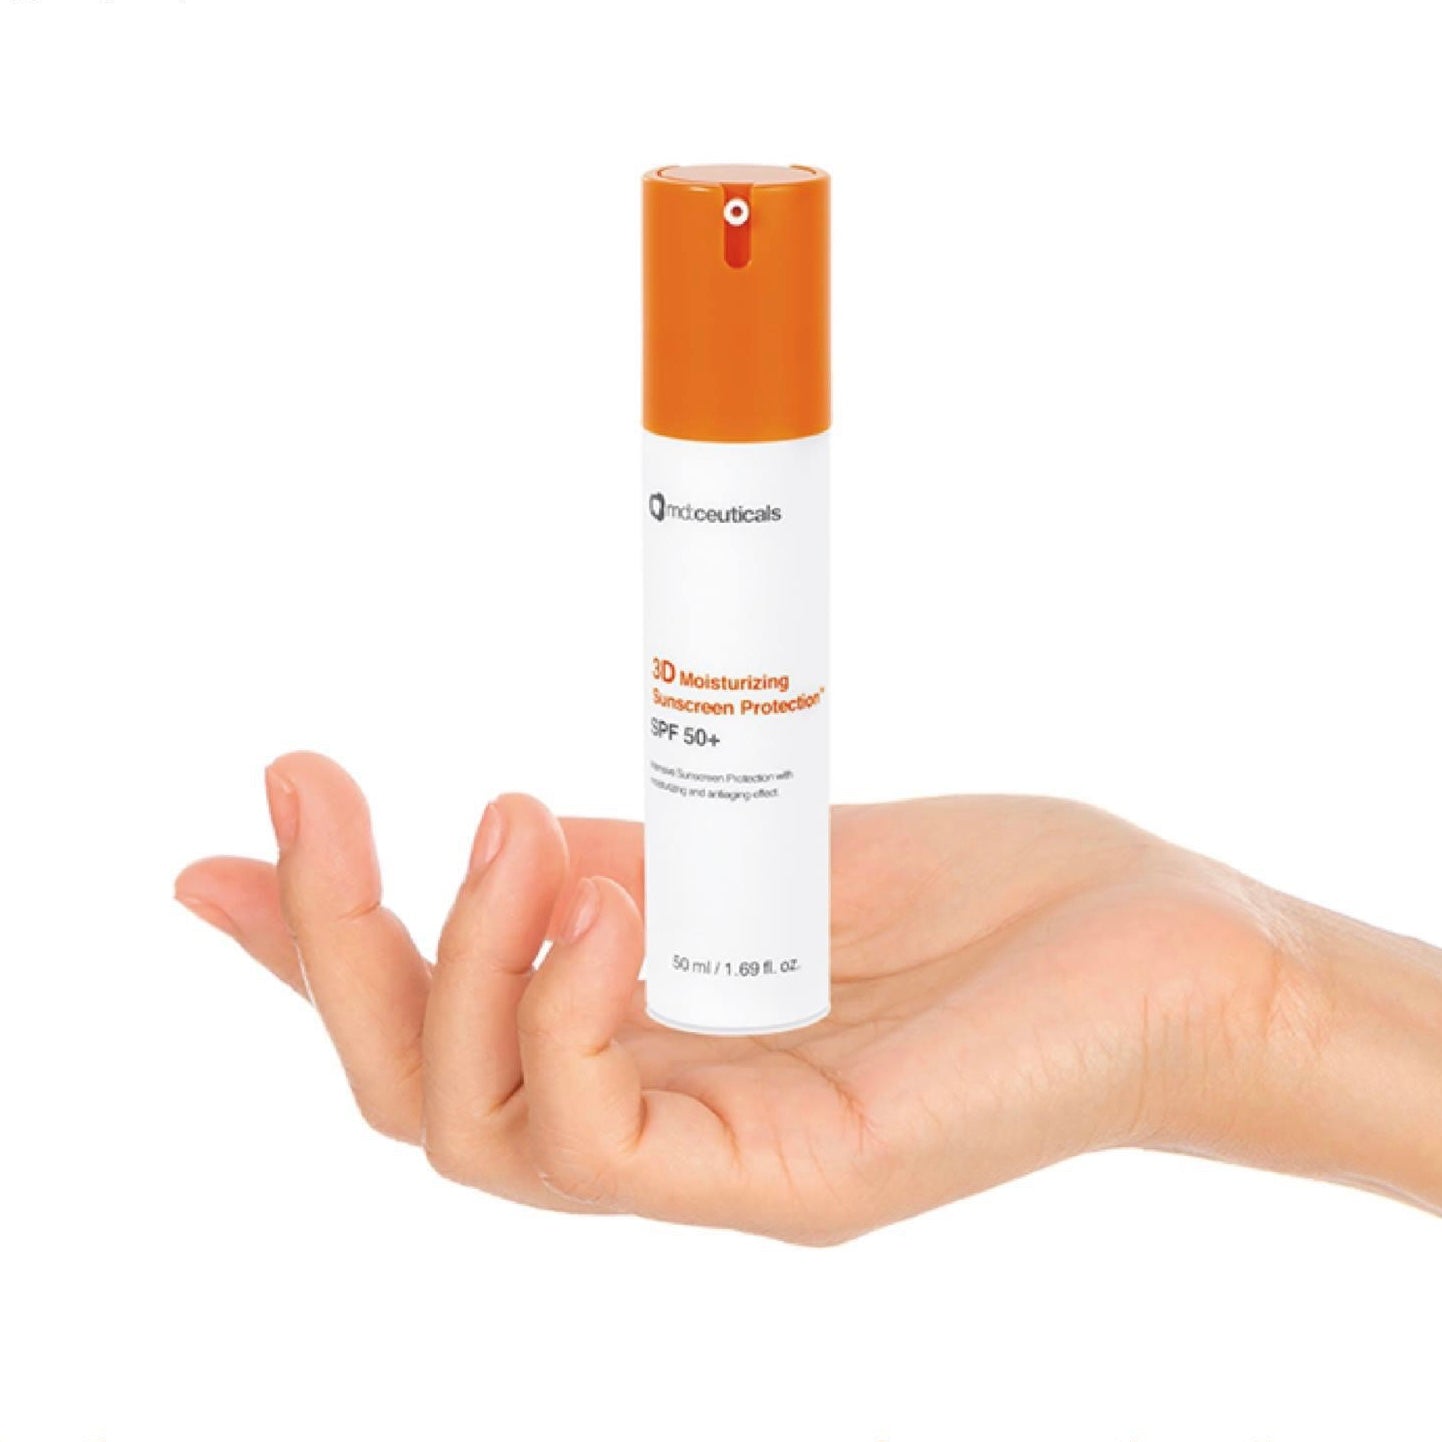 md:ceuticals 3D Moisturizing Sunscreen Protection SPF50+ 全物理抗氧防曬霜50ml - Beauty’s 5skin 